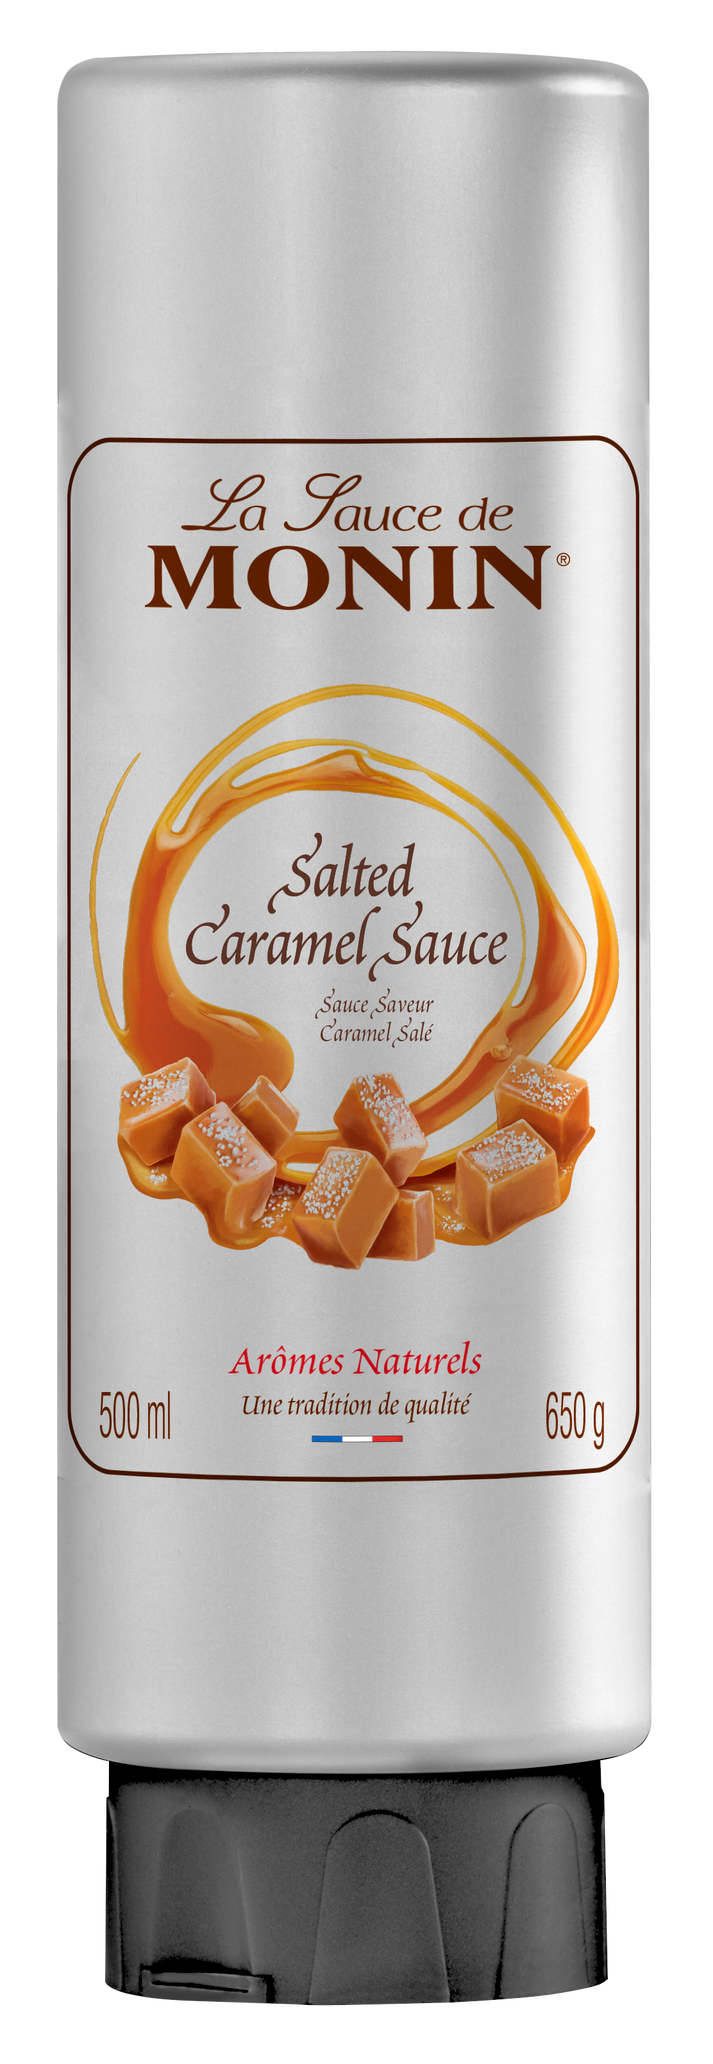 Buy MONIN Salted Caramel Sauce. It is a perfect match for all coffee, chocolate, and cocktail applications.